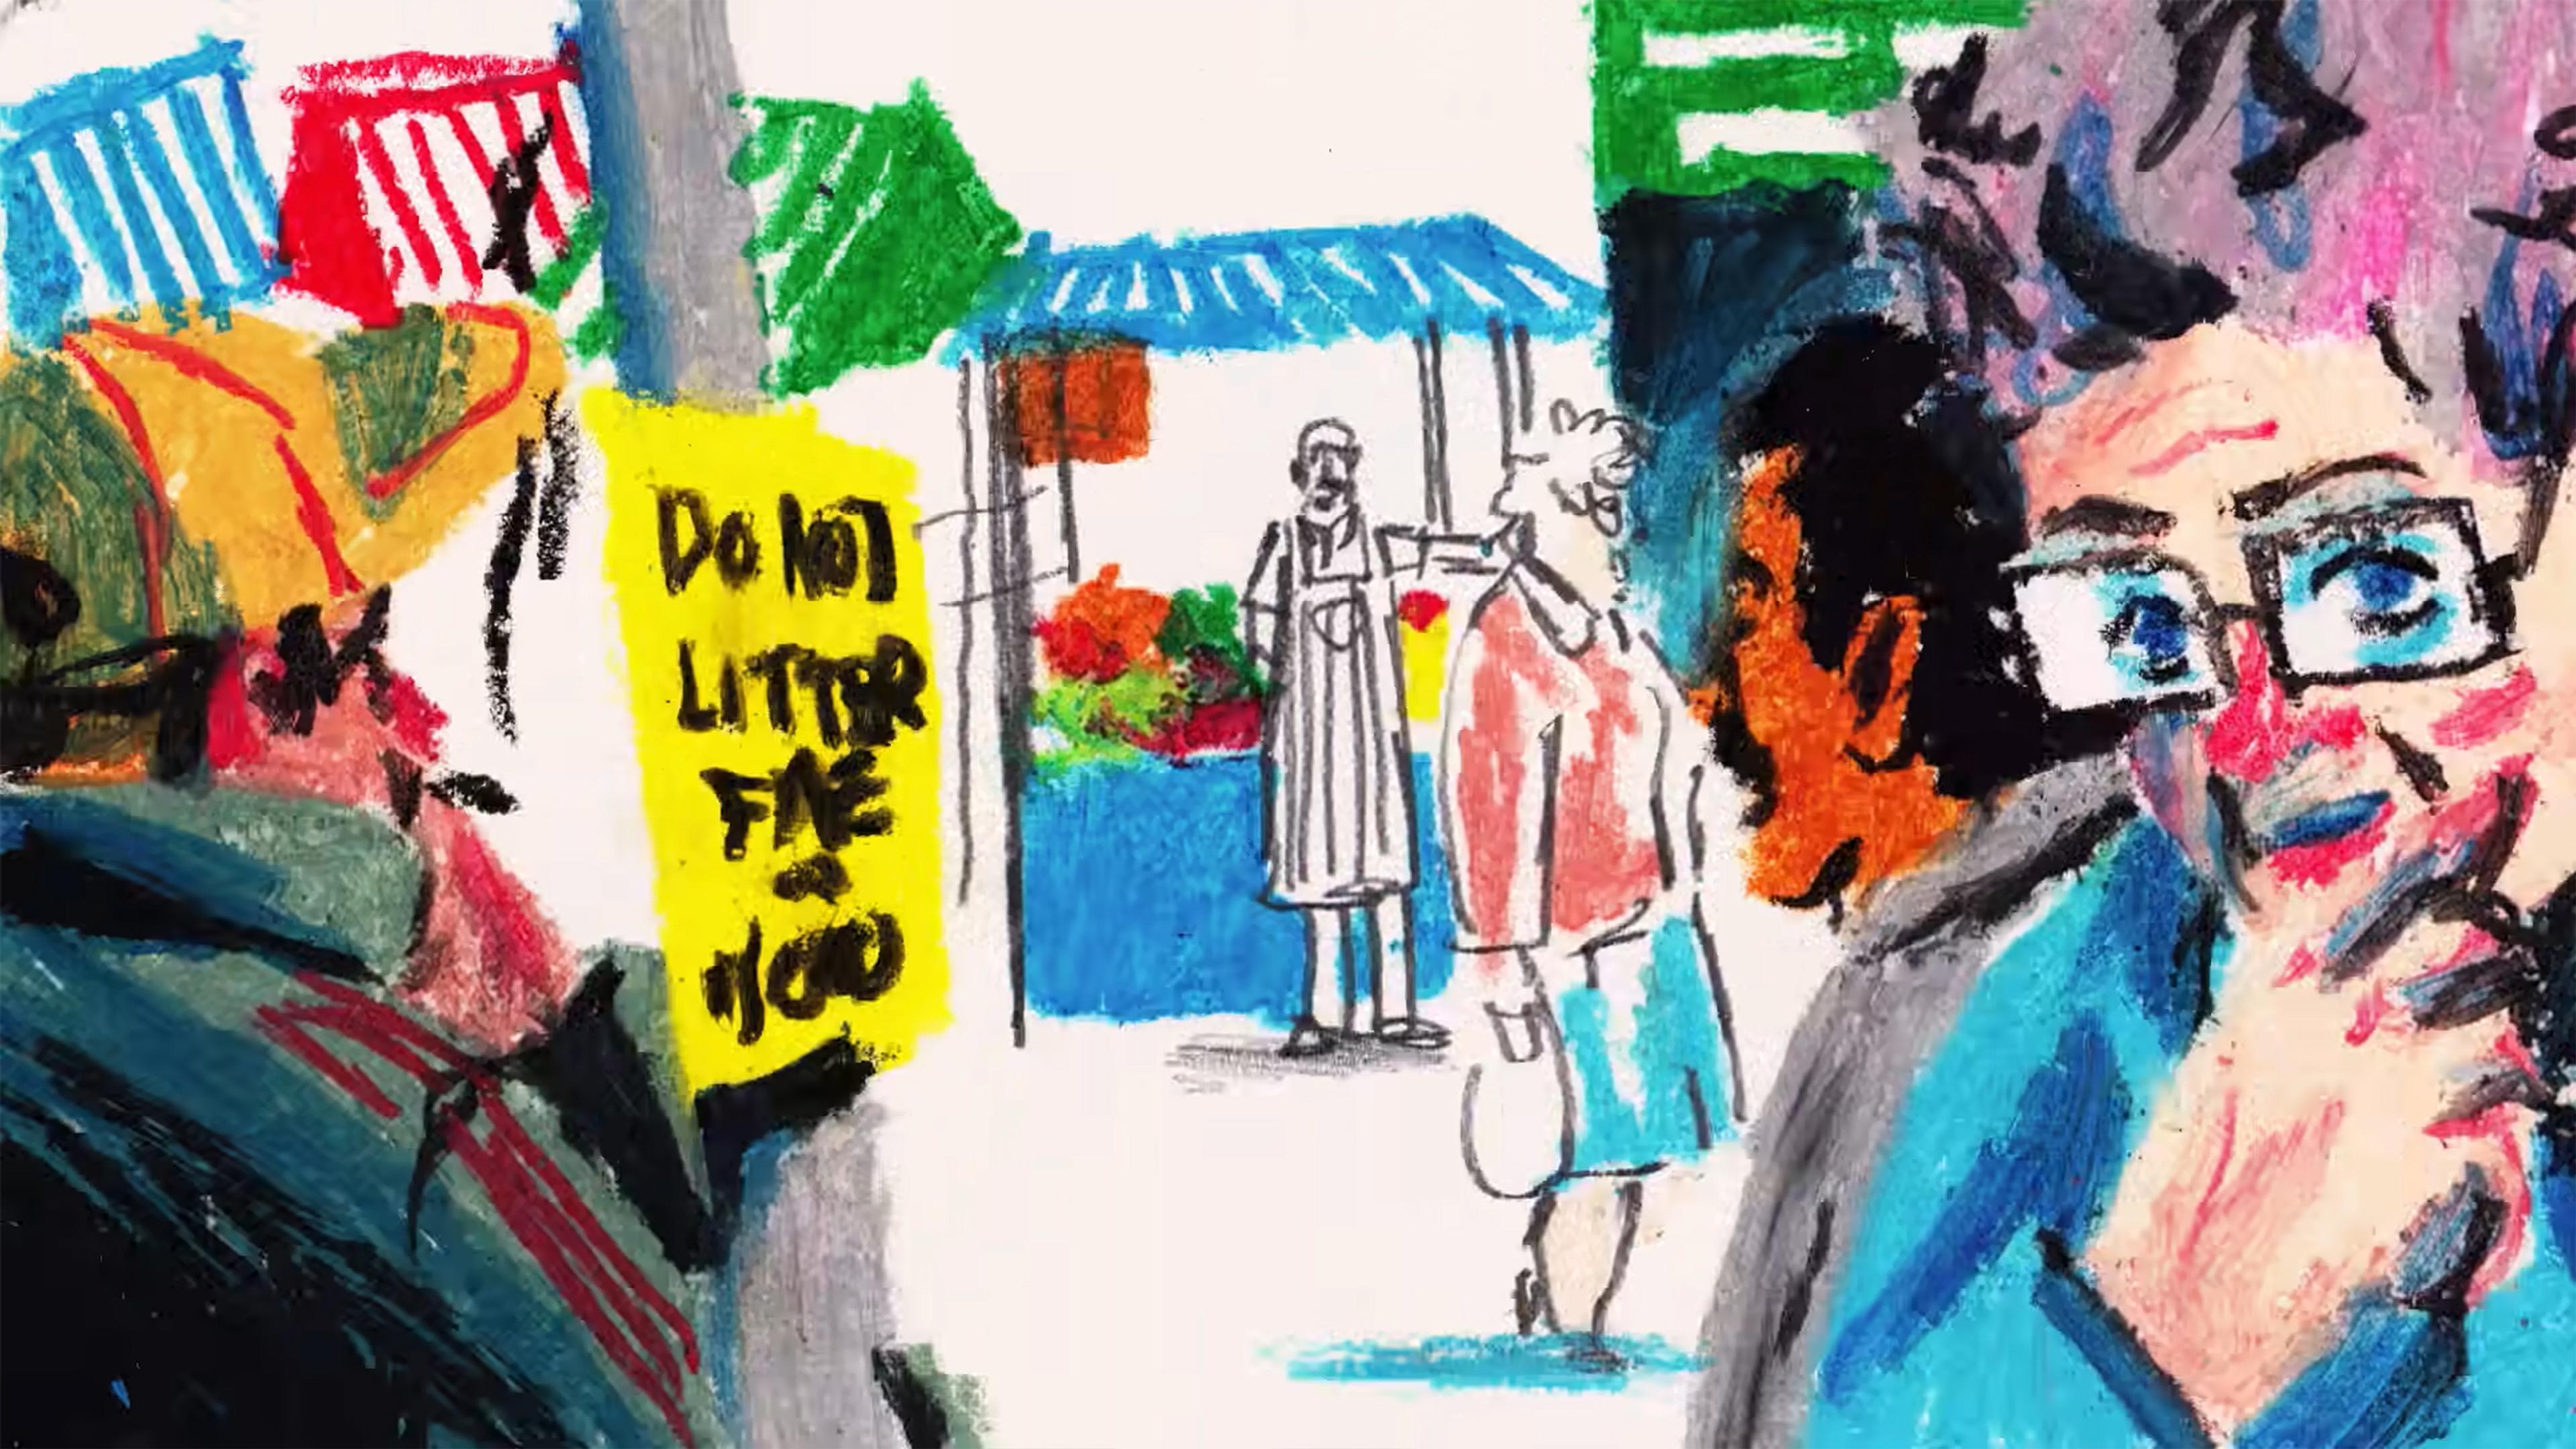 Colourful hand-drawn illustration of a market scene. Prominent figures include a man in a hat and a woman with glasses. Background shows fruit stall and vendor. A yellow sign reads “DO NOT LITTER”. The atmosphere is busy and vibrant with vibrant colours used throughout the artwork.